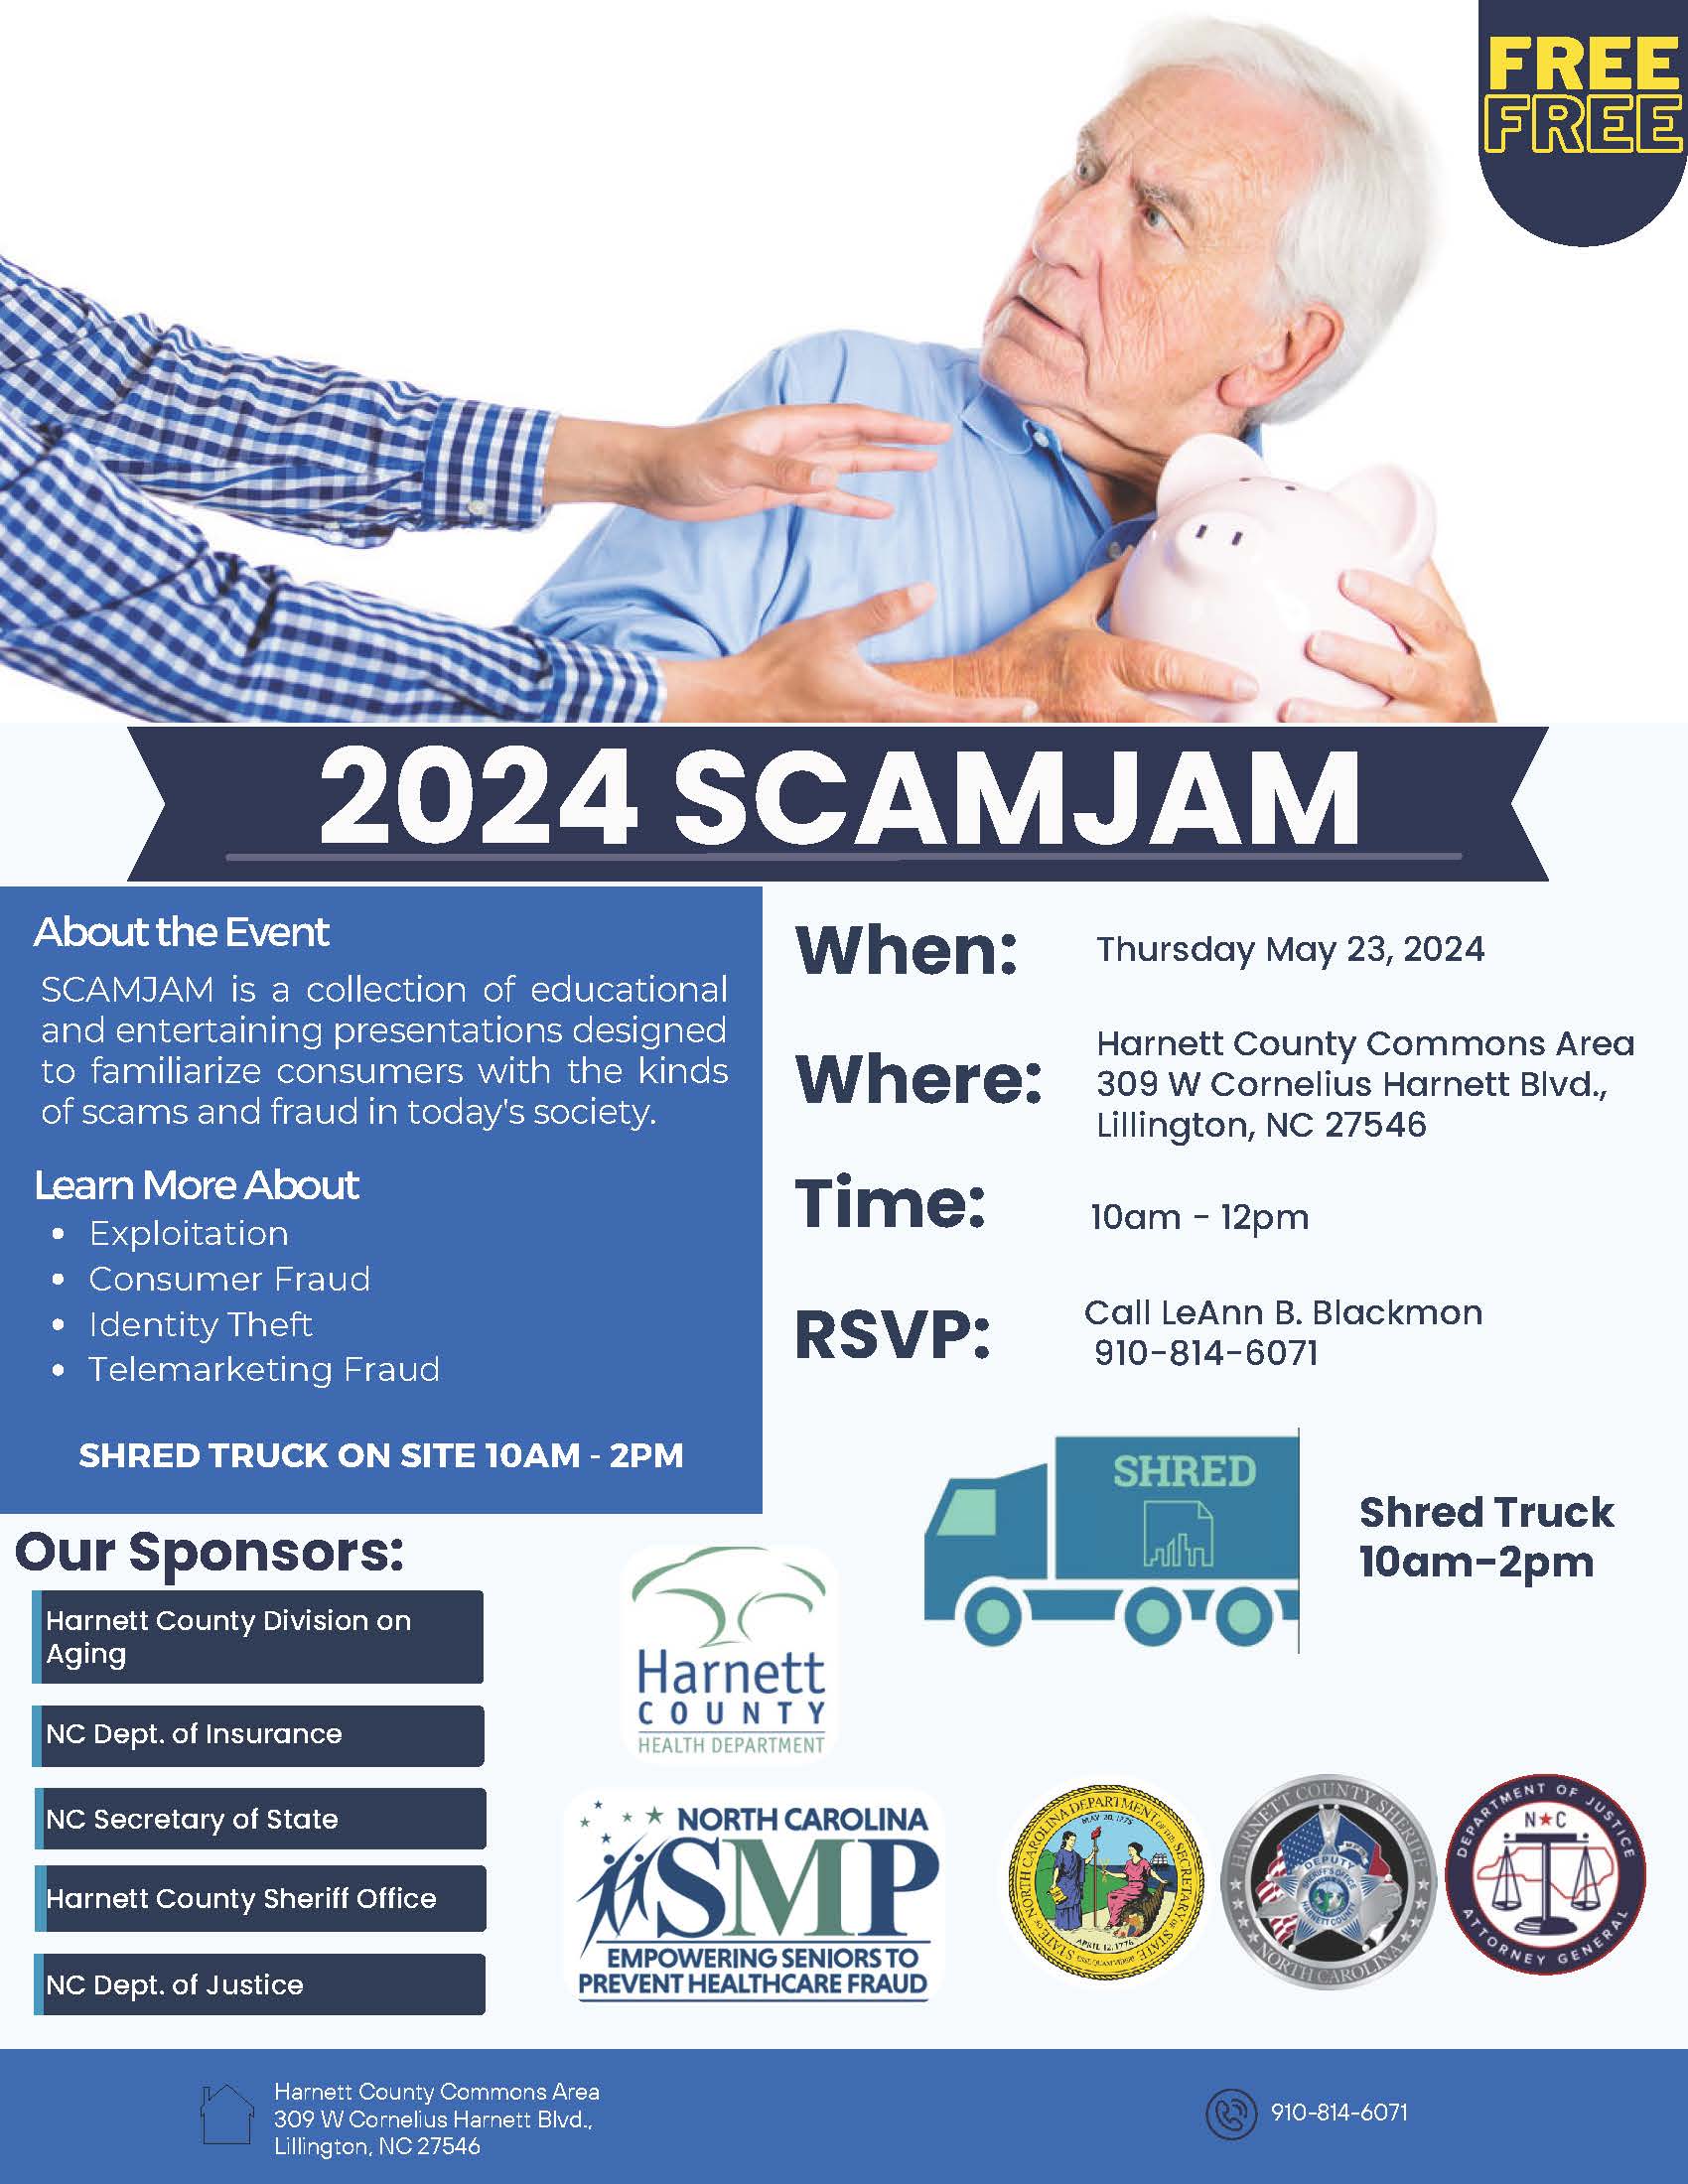 Scam Jam: May 23, 2024 